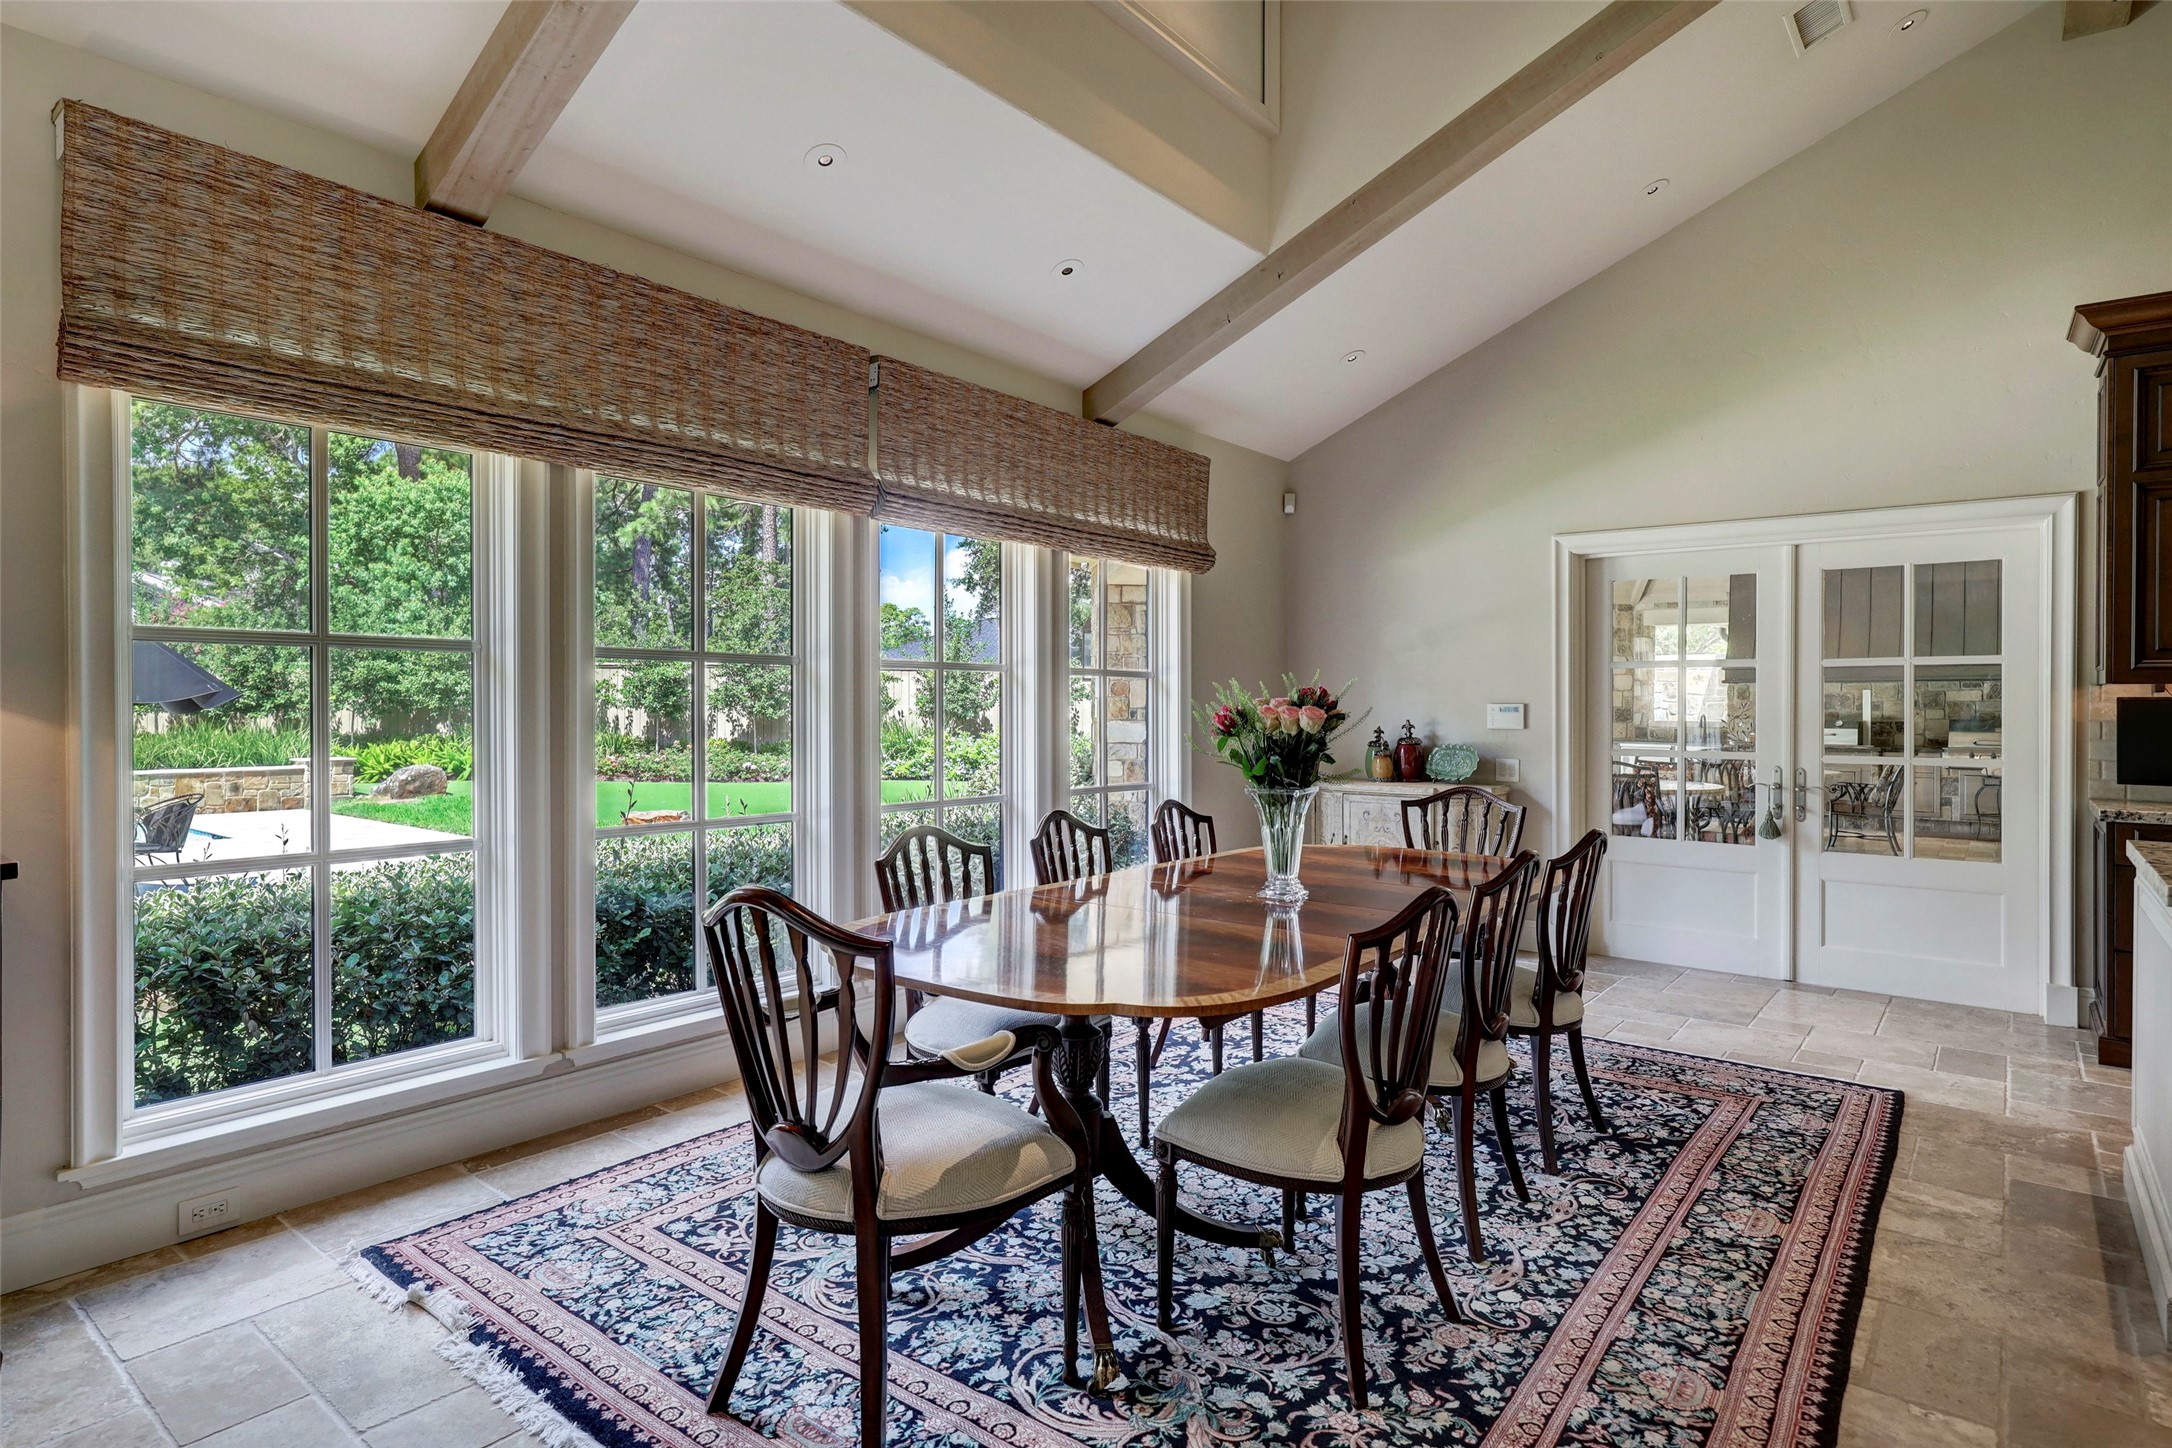 The dining room enjoys views of the lovely landscaping and pool.